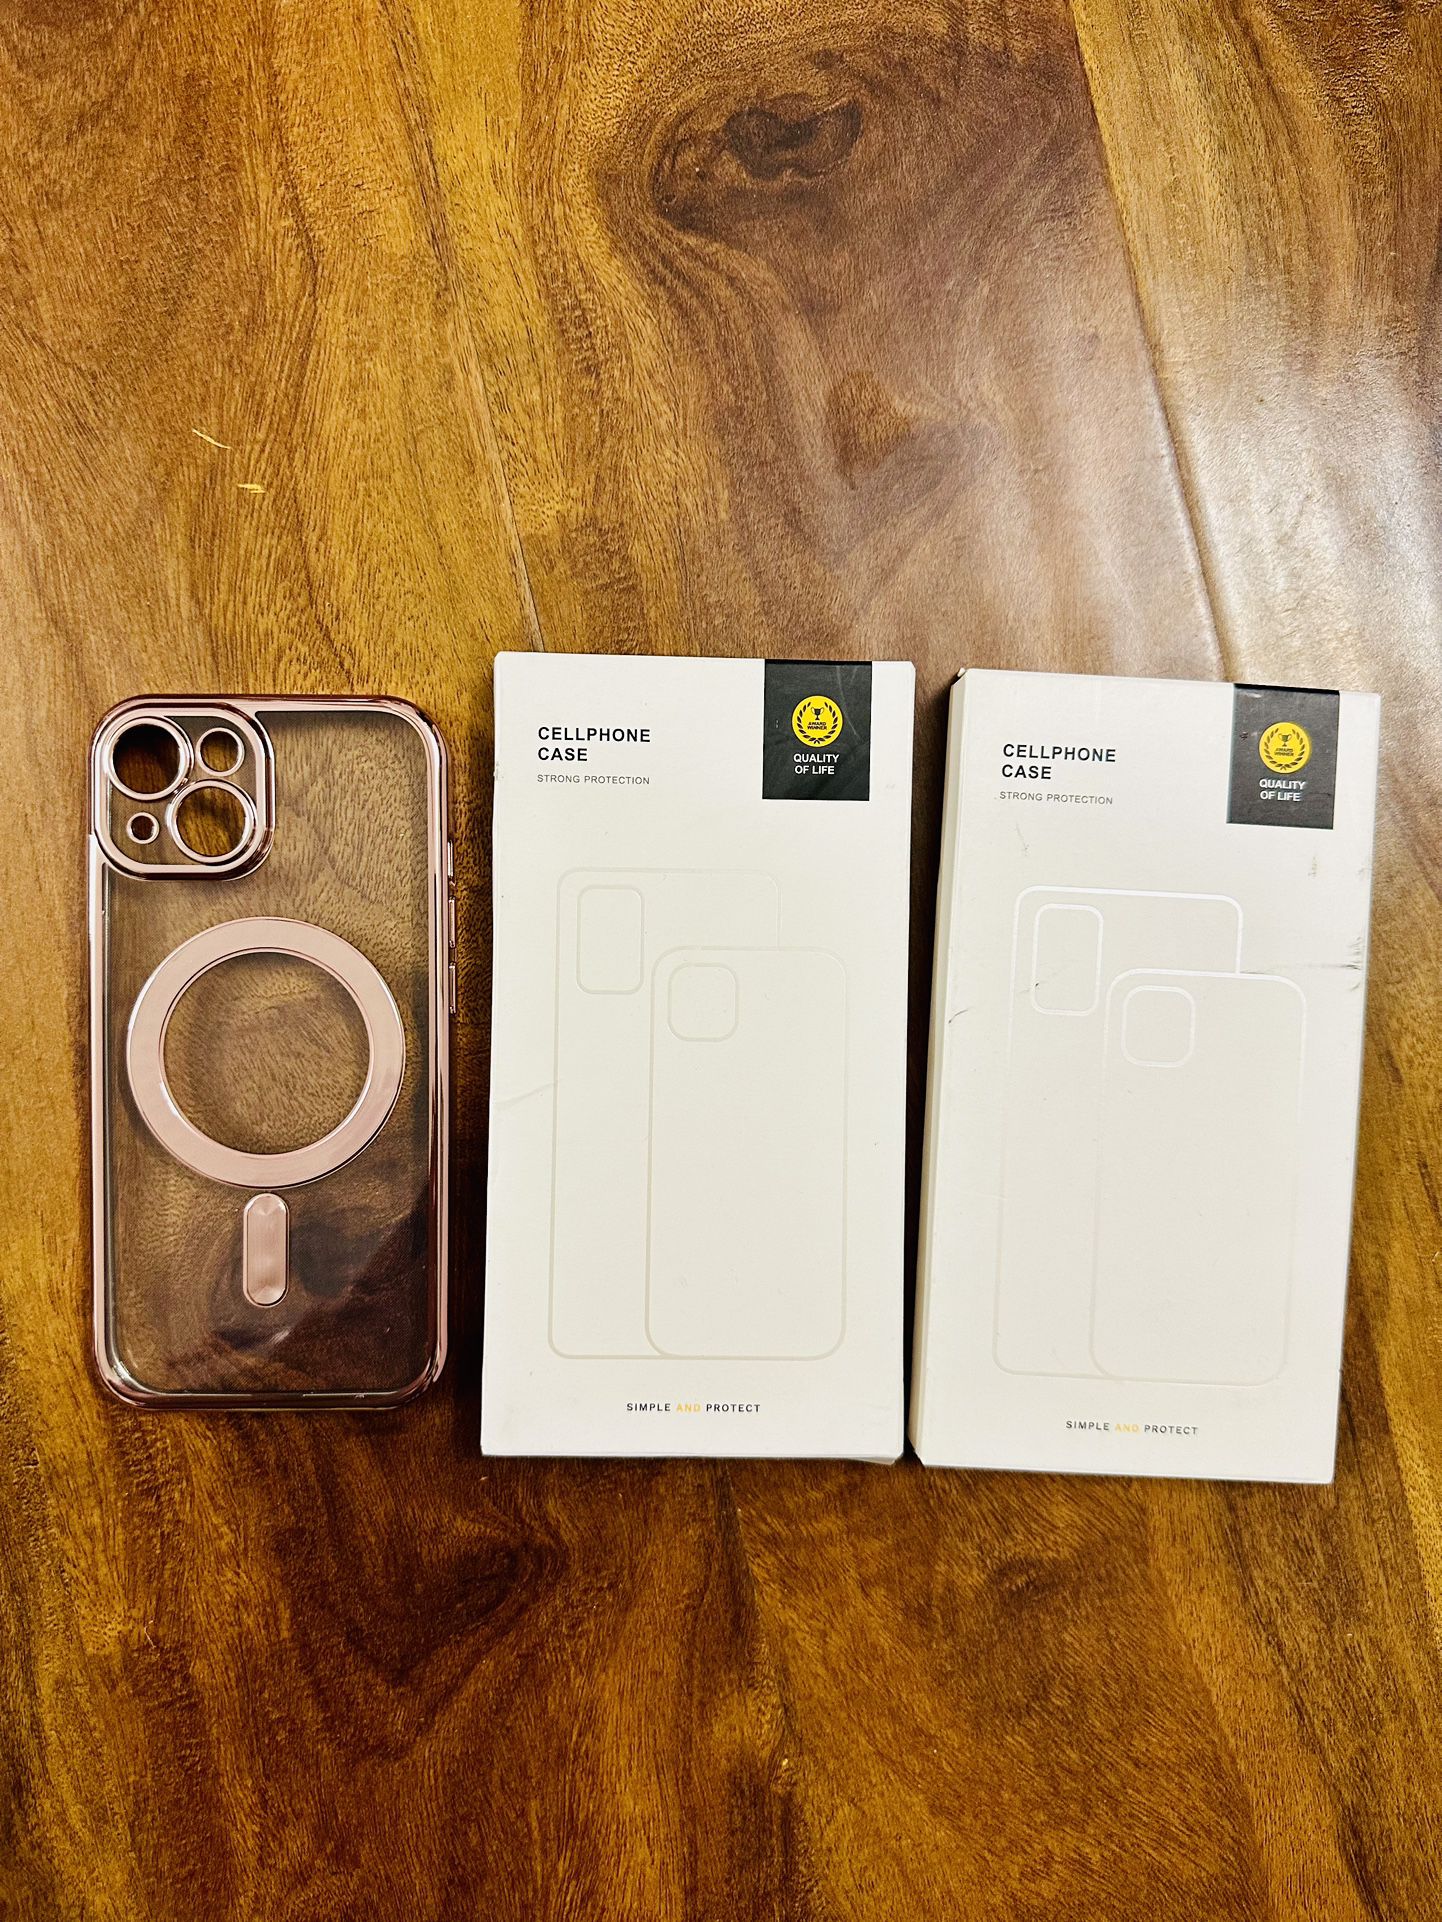 Chargeable Case For iPhone 15 New Condition In Box $10/each